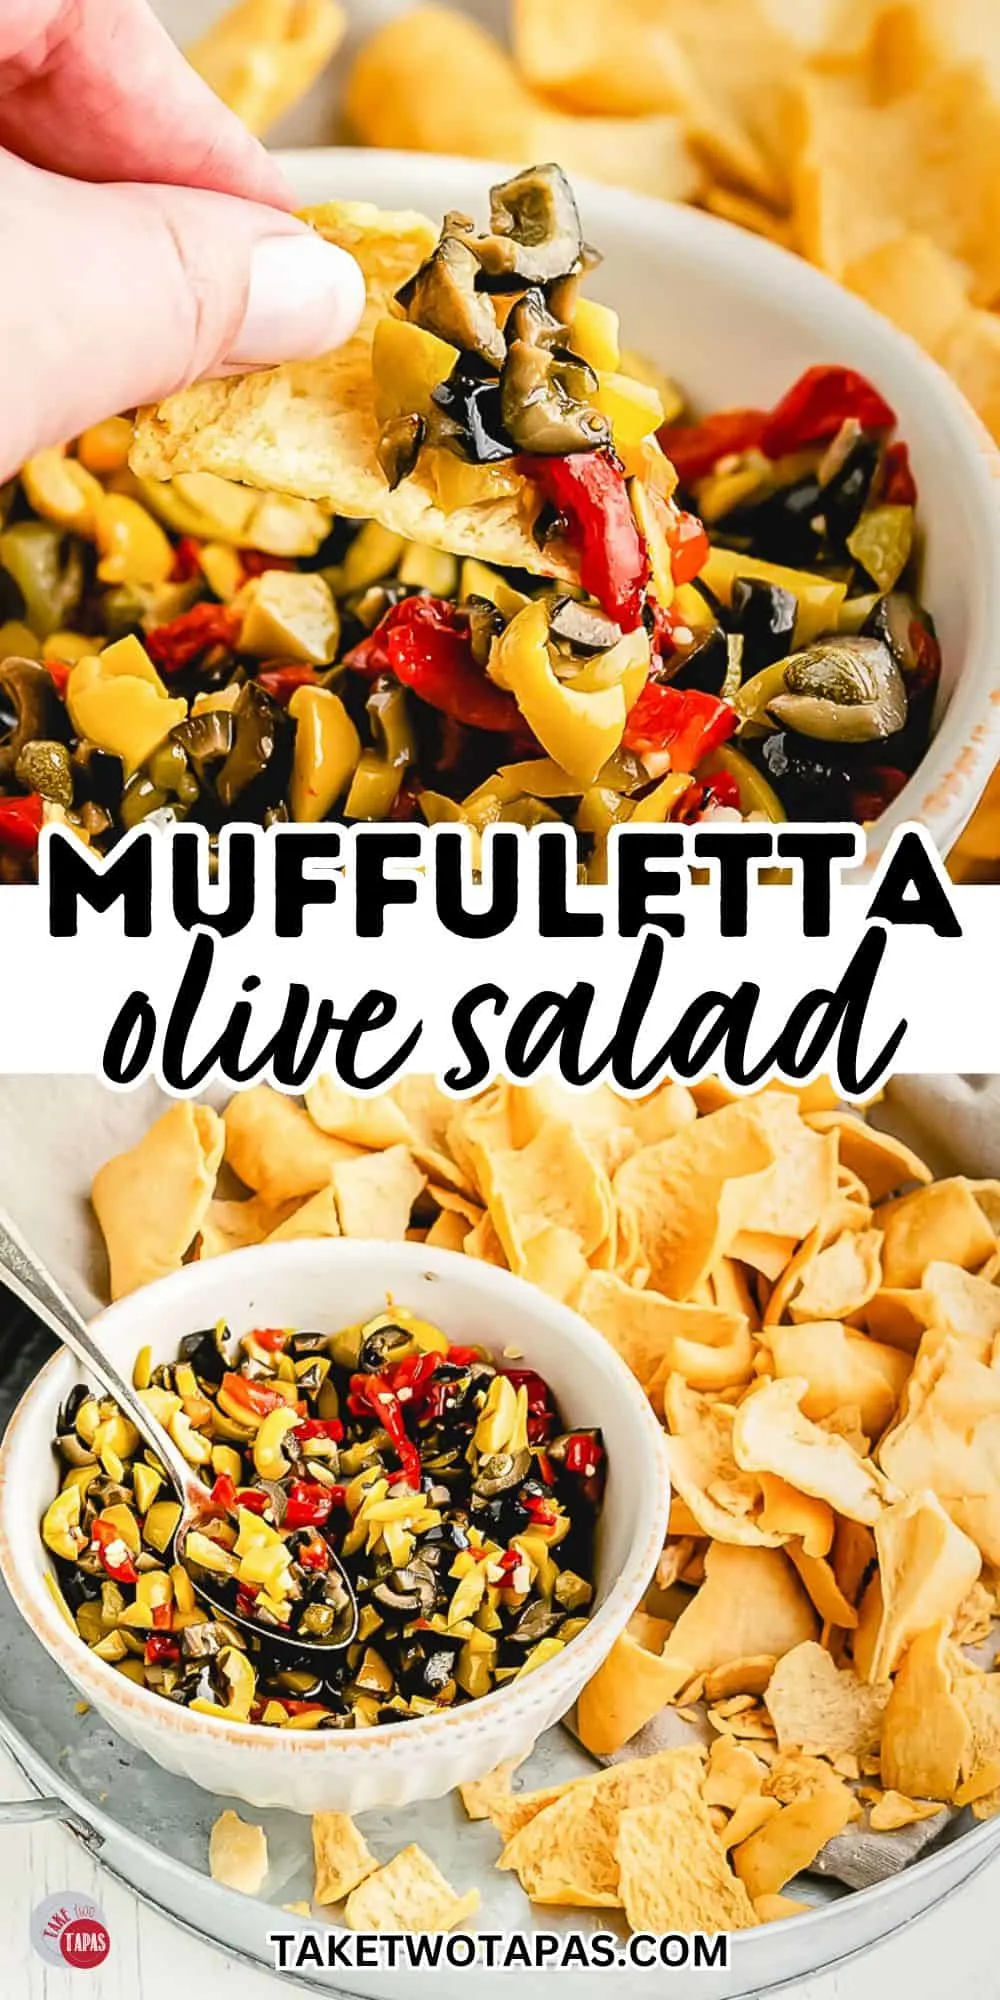 muffuletta olive salad from New Orleans